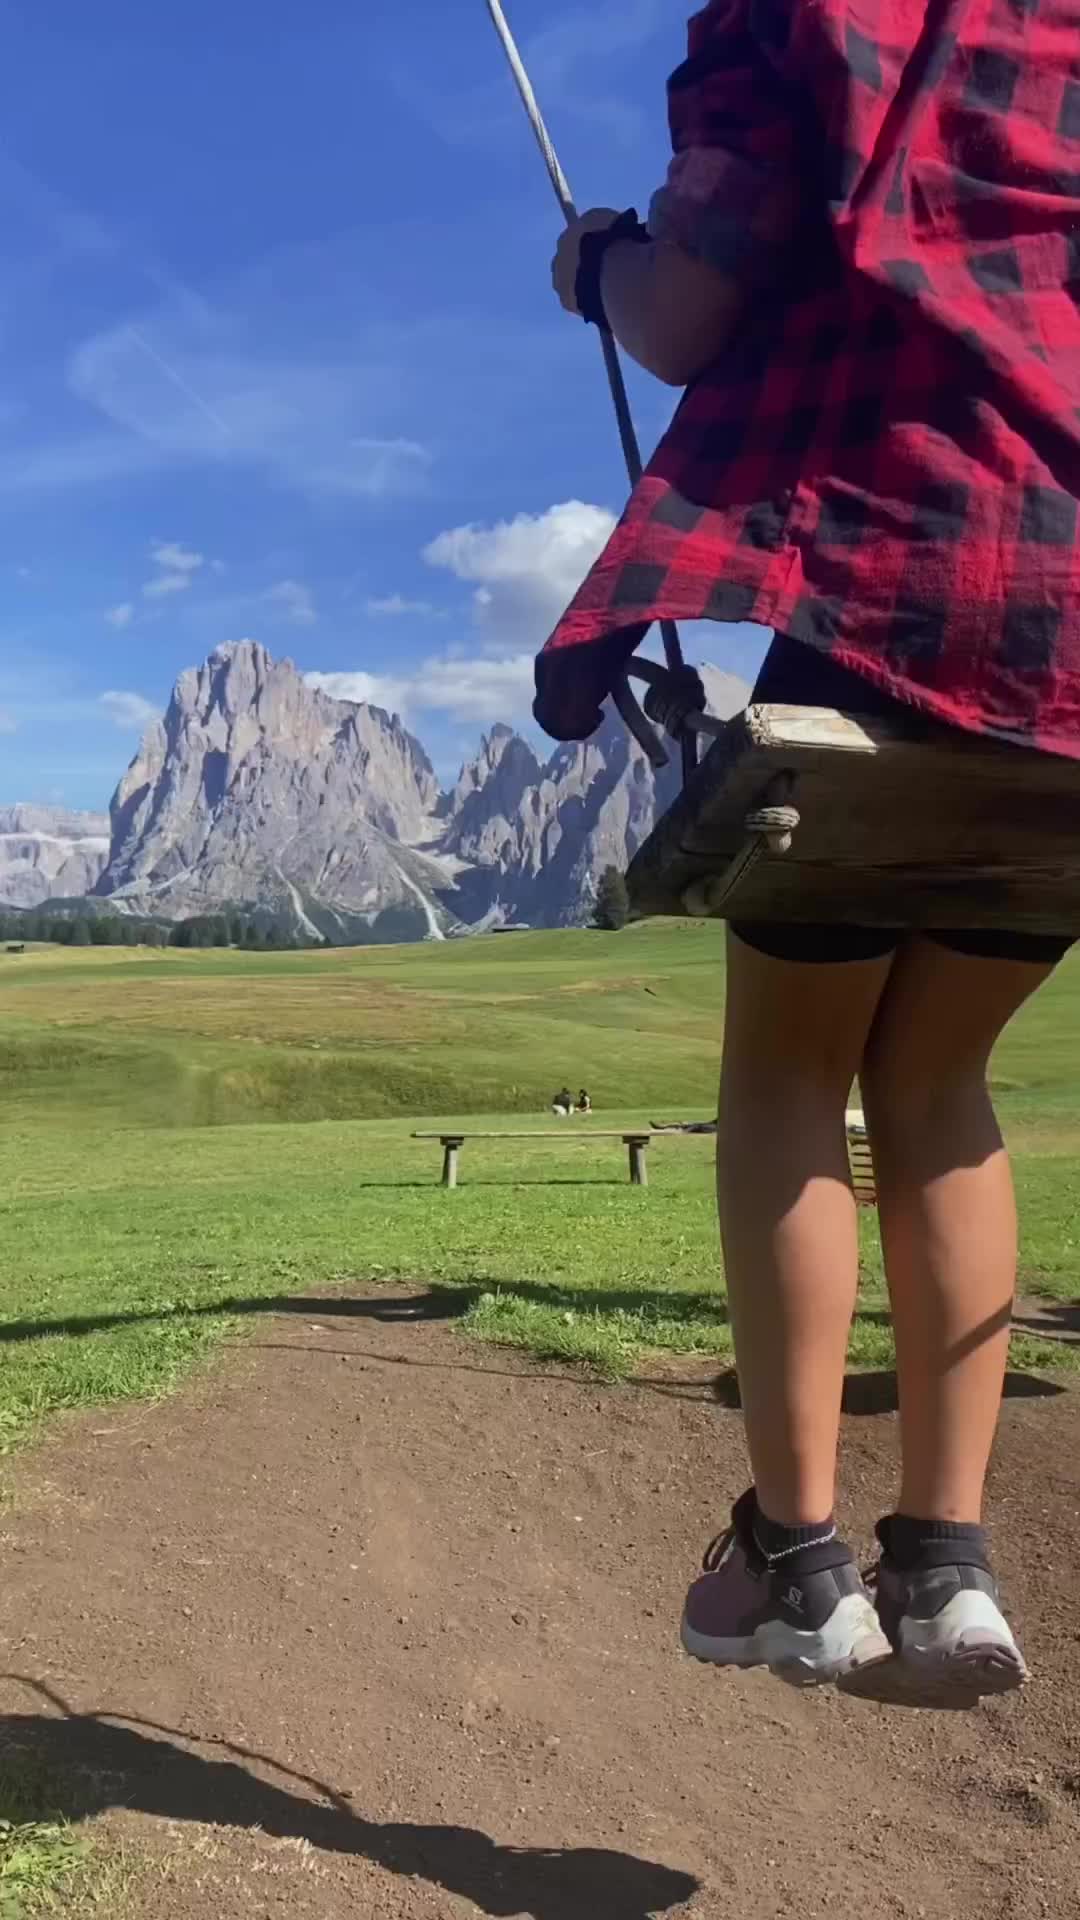 The Most Spectacular Swing in the Dolomites